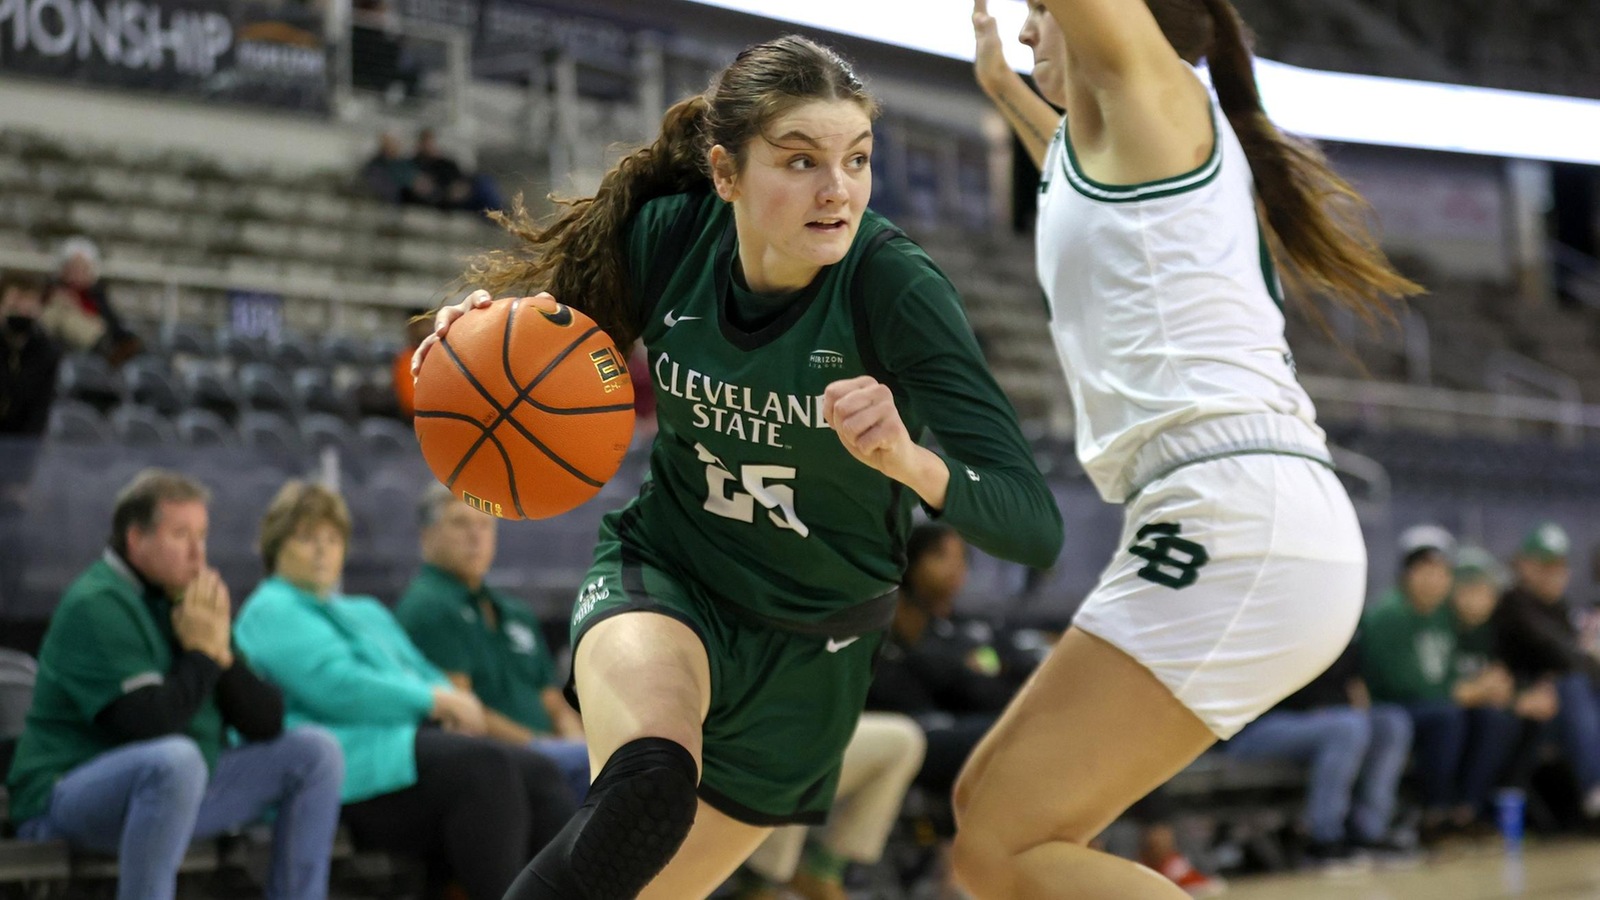 Cleveland State Women’s Basketball Earns Spot In #HLWBB Championship Game With 69-42 Victory Over Green Bay